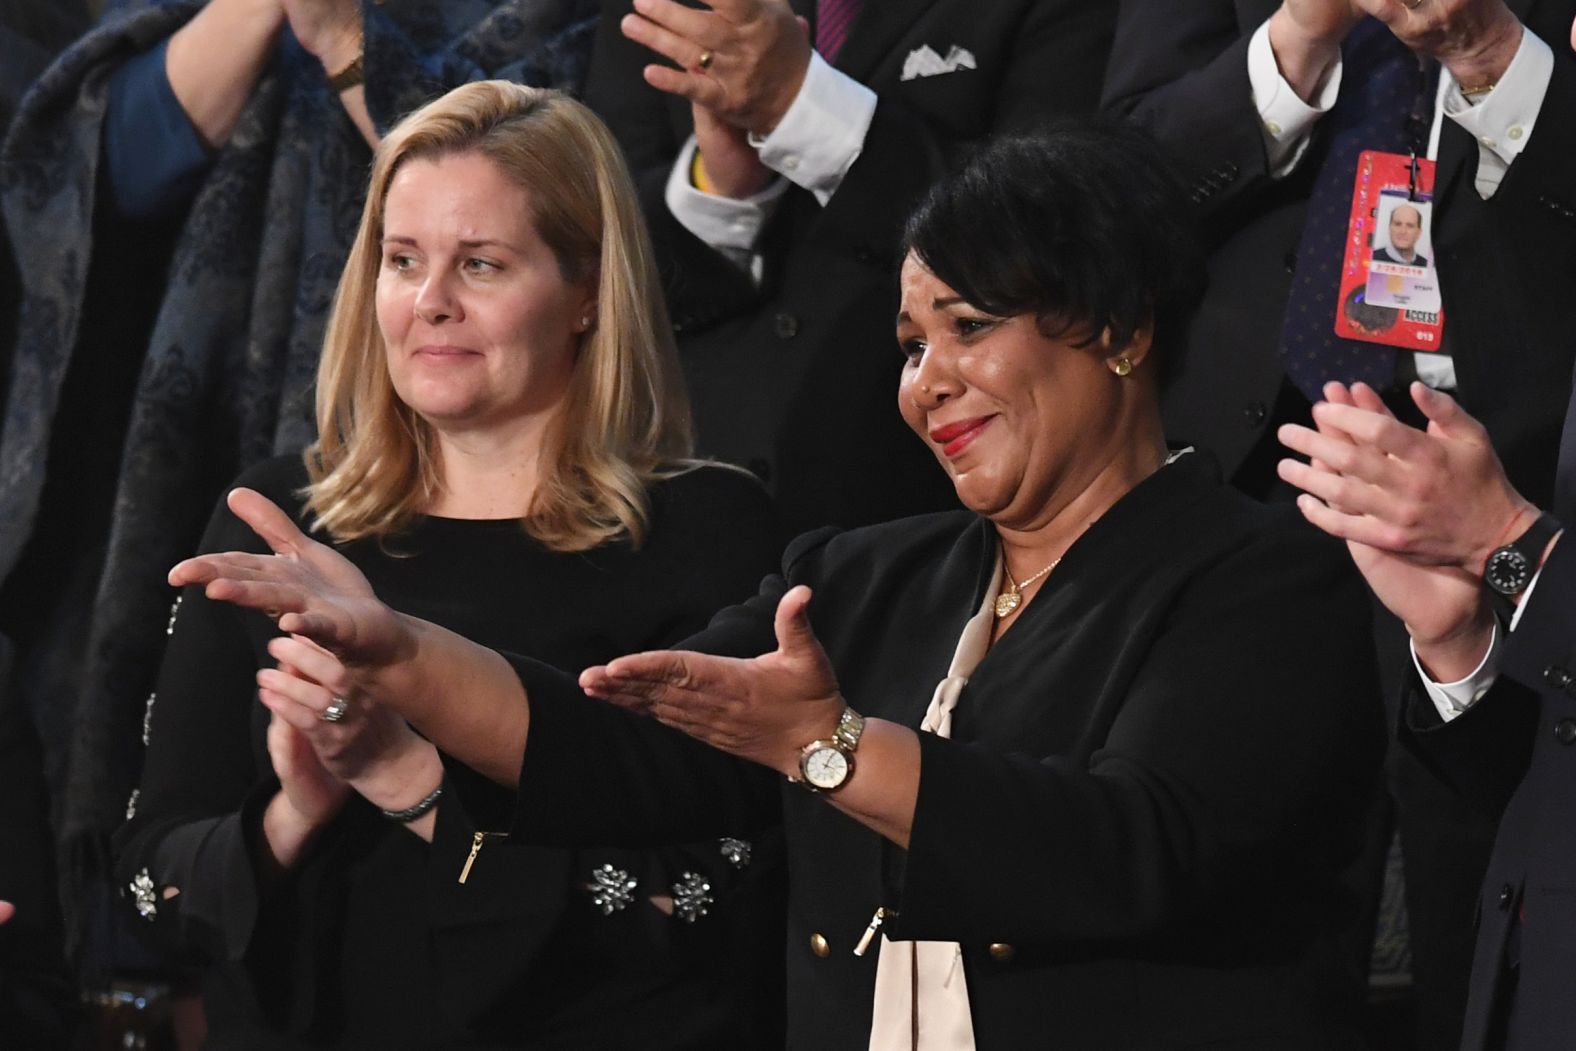 Alice Johnson, one of the President's <a href="index.php?page=&url=https%3A%2F%2Fwww.cnn.com%2F2019%2F02%2F04%2Fpolitics%2Ftrump-state-of-the-union-guests%2Findex.html" target="_blank">13 special guests,</a> reacts as Trump <a href="index.php?page=&url=https%3A%2F%2Fwww.cnn.com%2Fpolitics%2Flive-news%2Fstate-of-the-union-2019%2Fh_fa76fc0cda6938147be6b3c597e0a950" target="_blank">acknowledges her during his speech.</a> Johnson, a first-time nonviolent drug offender, had her sentence commuted by Trump following his Oval Office meeting with Kim Kardashian West.